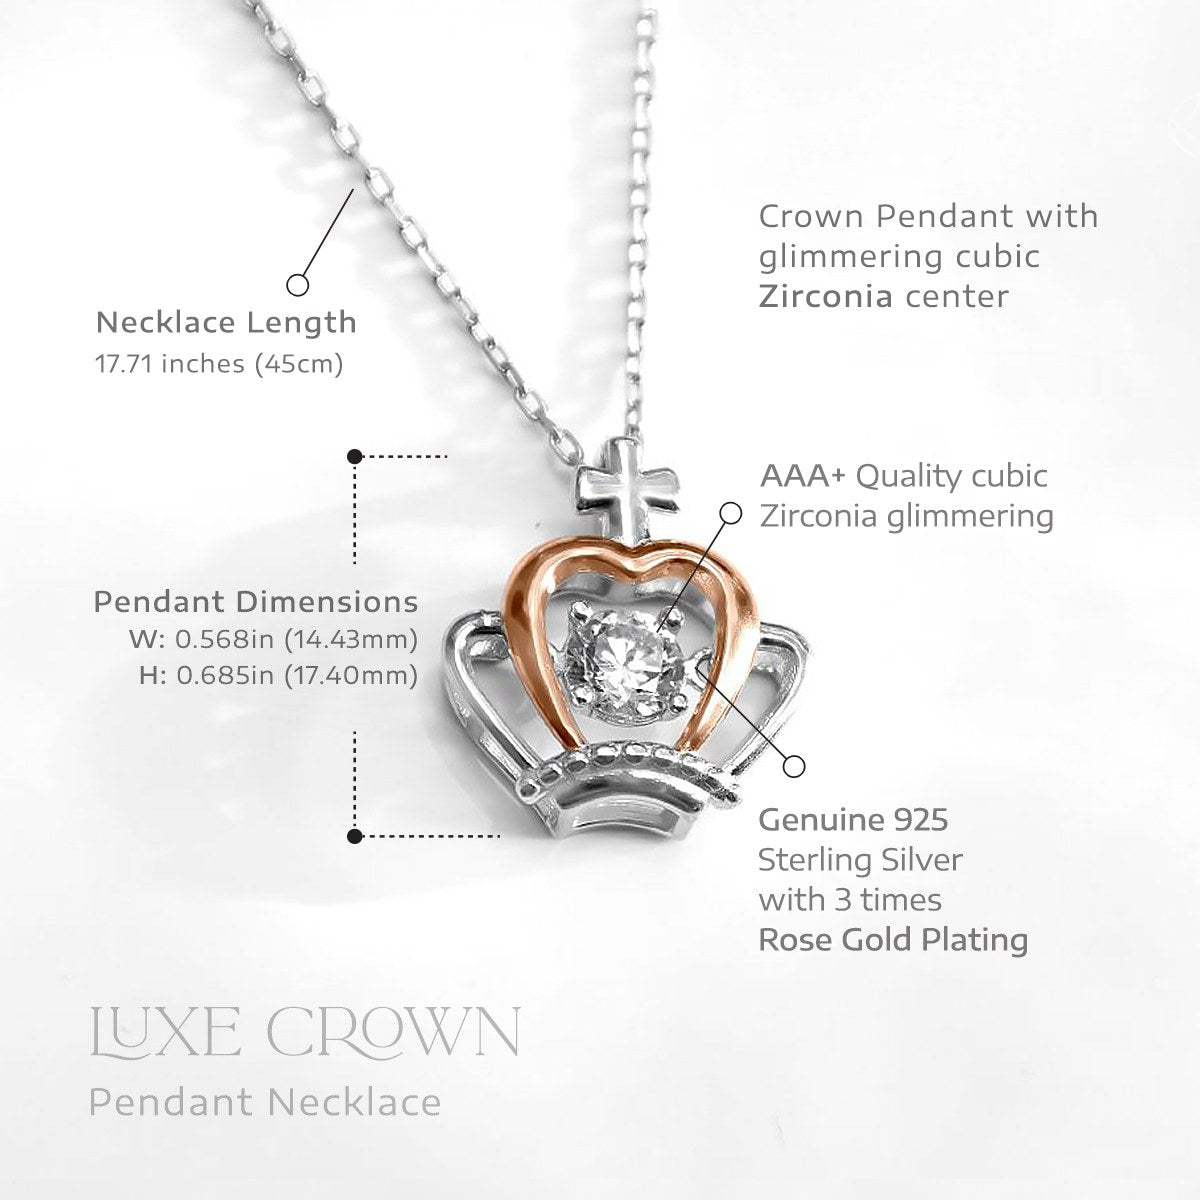 To My Beautiful Daughter, I Closed My Eyes - Luxe Crown Necklace Gift Set